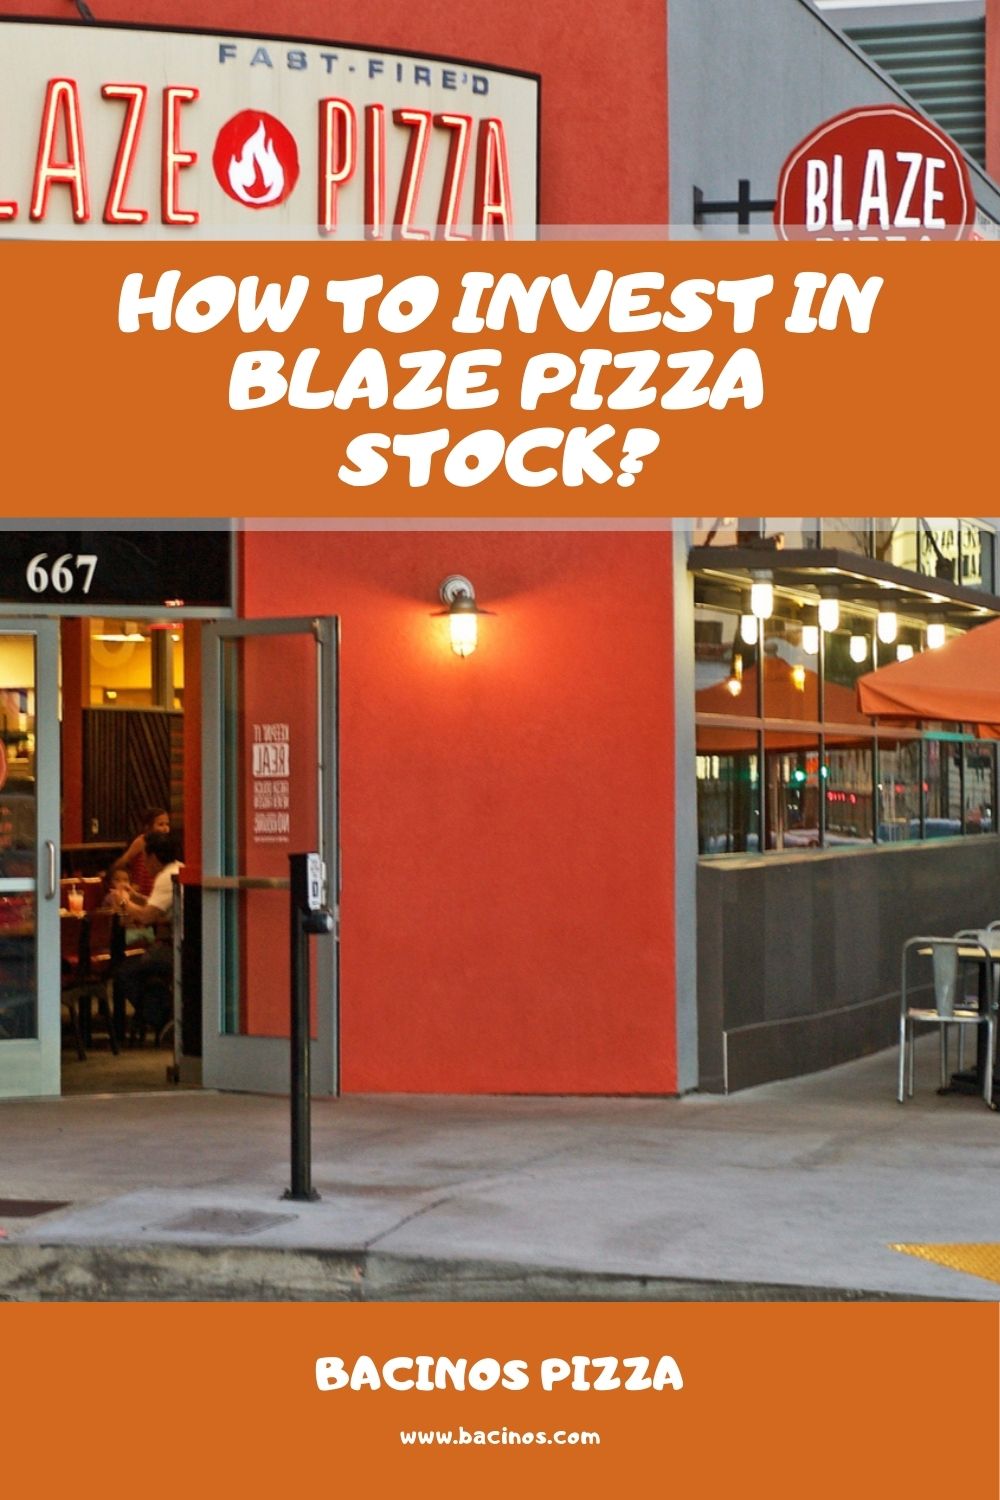 How to Invest In Blaze Pizza Stock (The Nitty-Gritty Details Demystified) 3